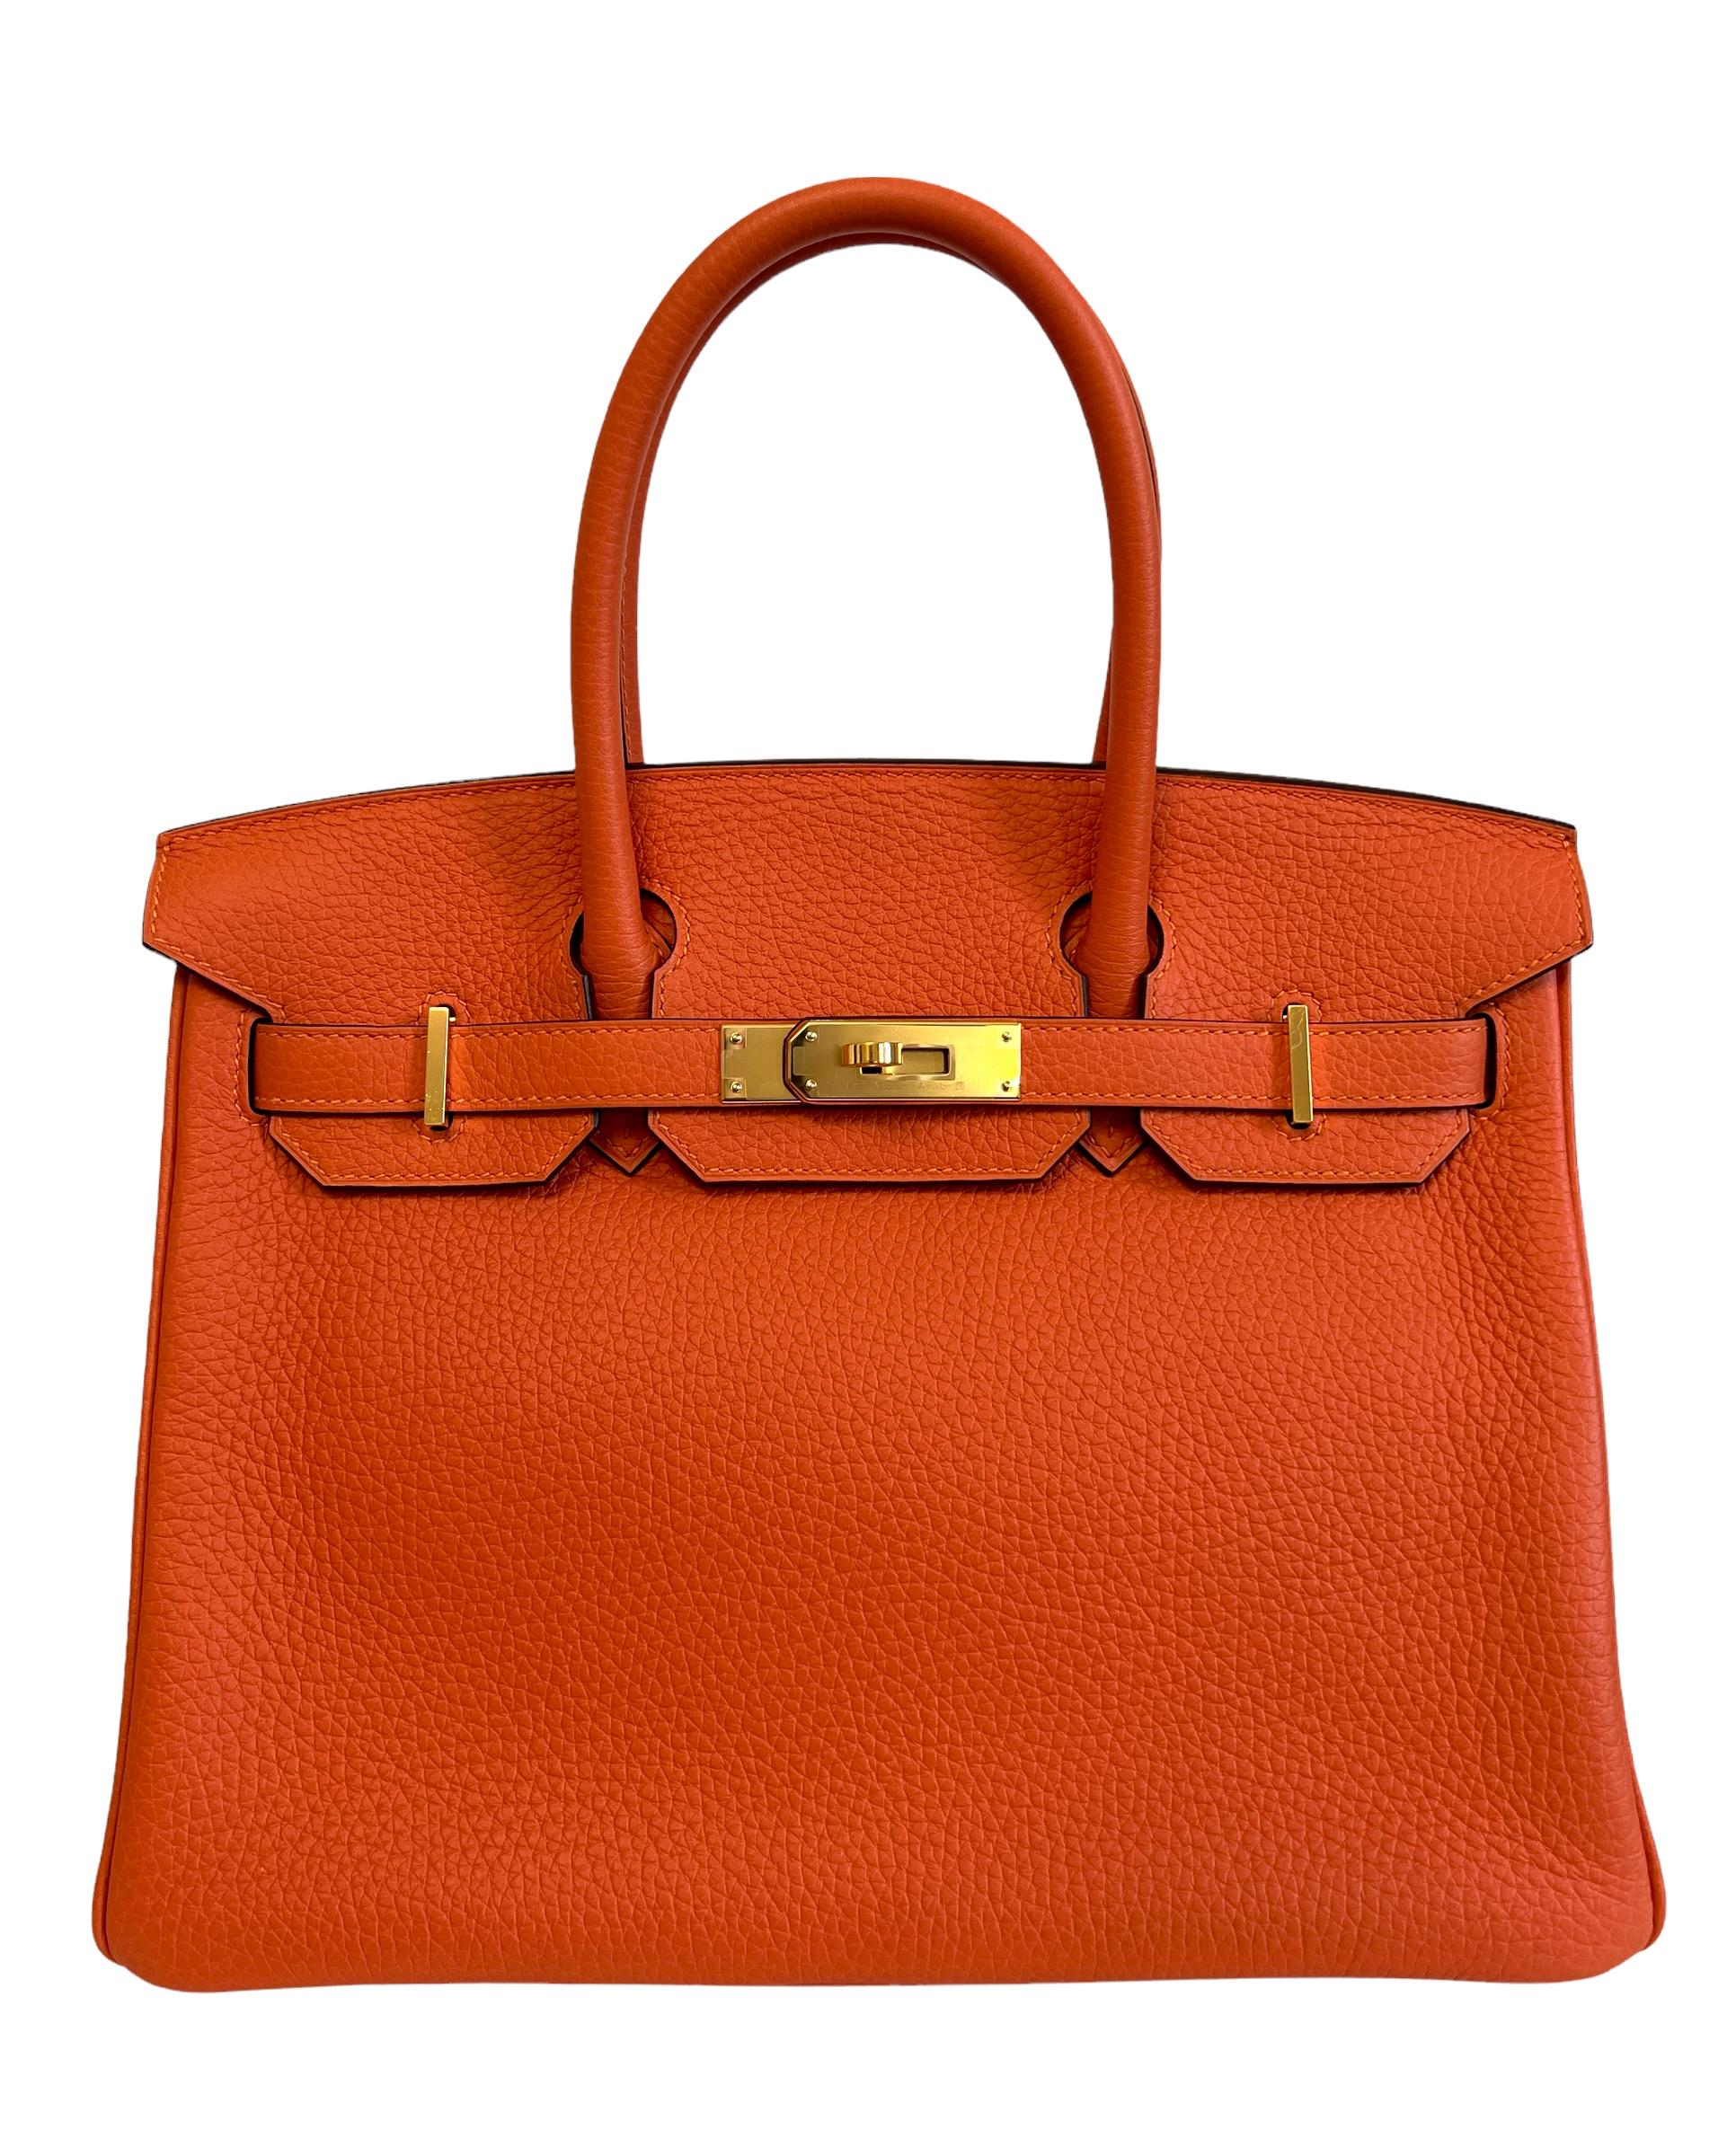 Stunning Hermes Birkin 30 Feu Orange Leather complimented with Gold Hardware. Y Stamp 2020, Pristine Condition with Plastic on Hardware. 

Shop with confidence from Lux Addicts. Authenticity Guaranteed!